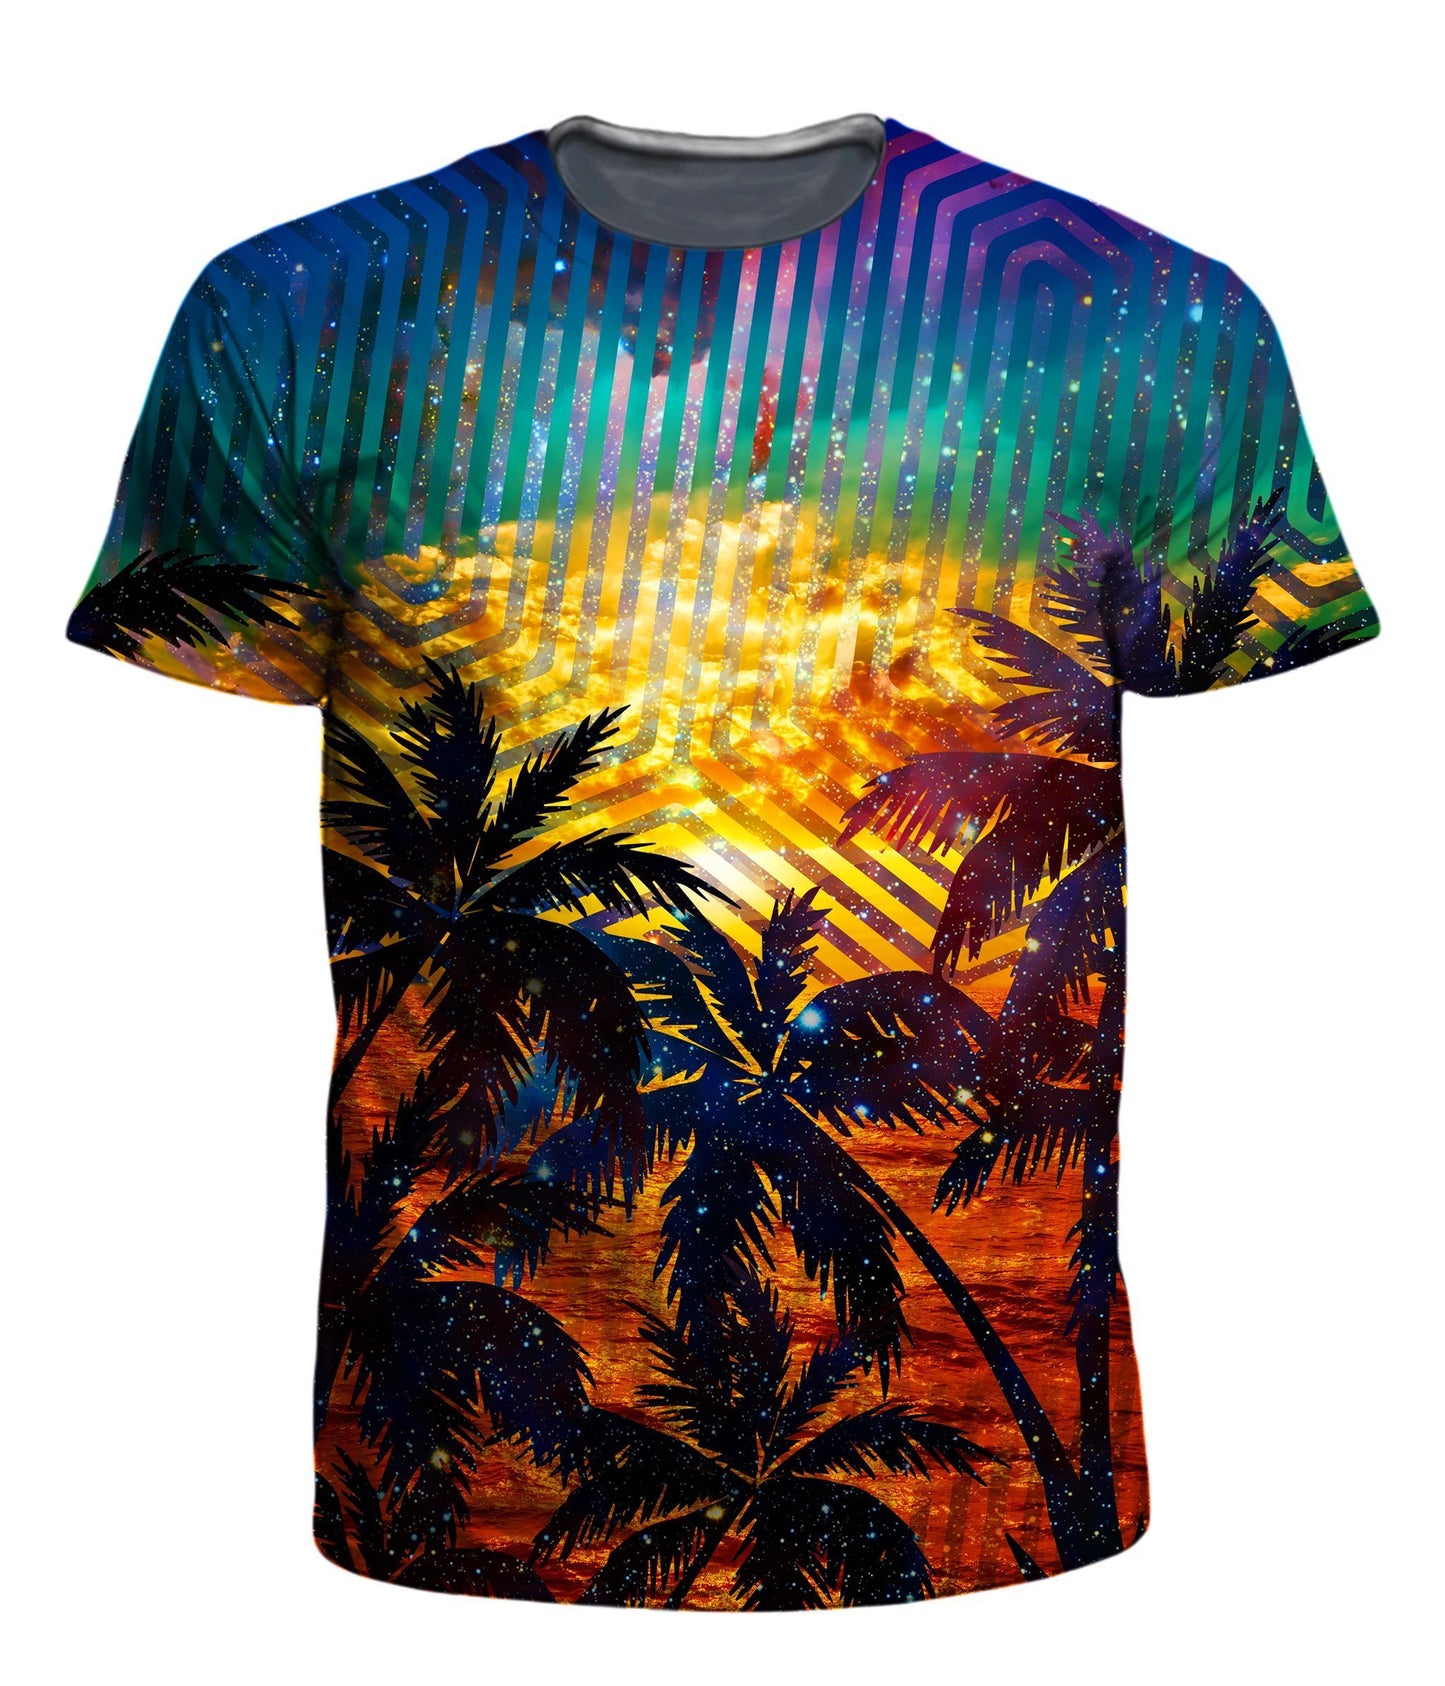 To Infinity and The Palms Men's T-Shirt – iEDM